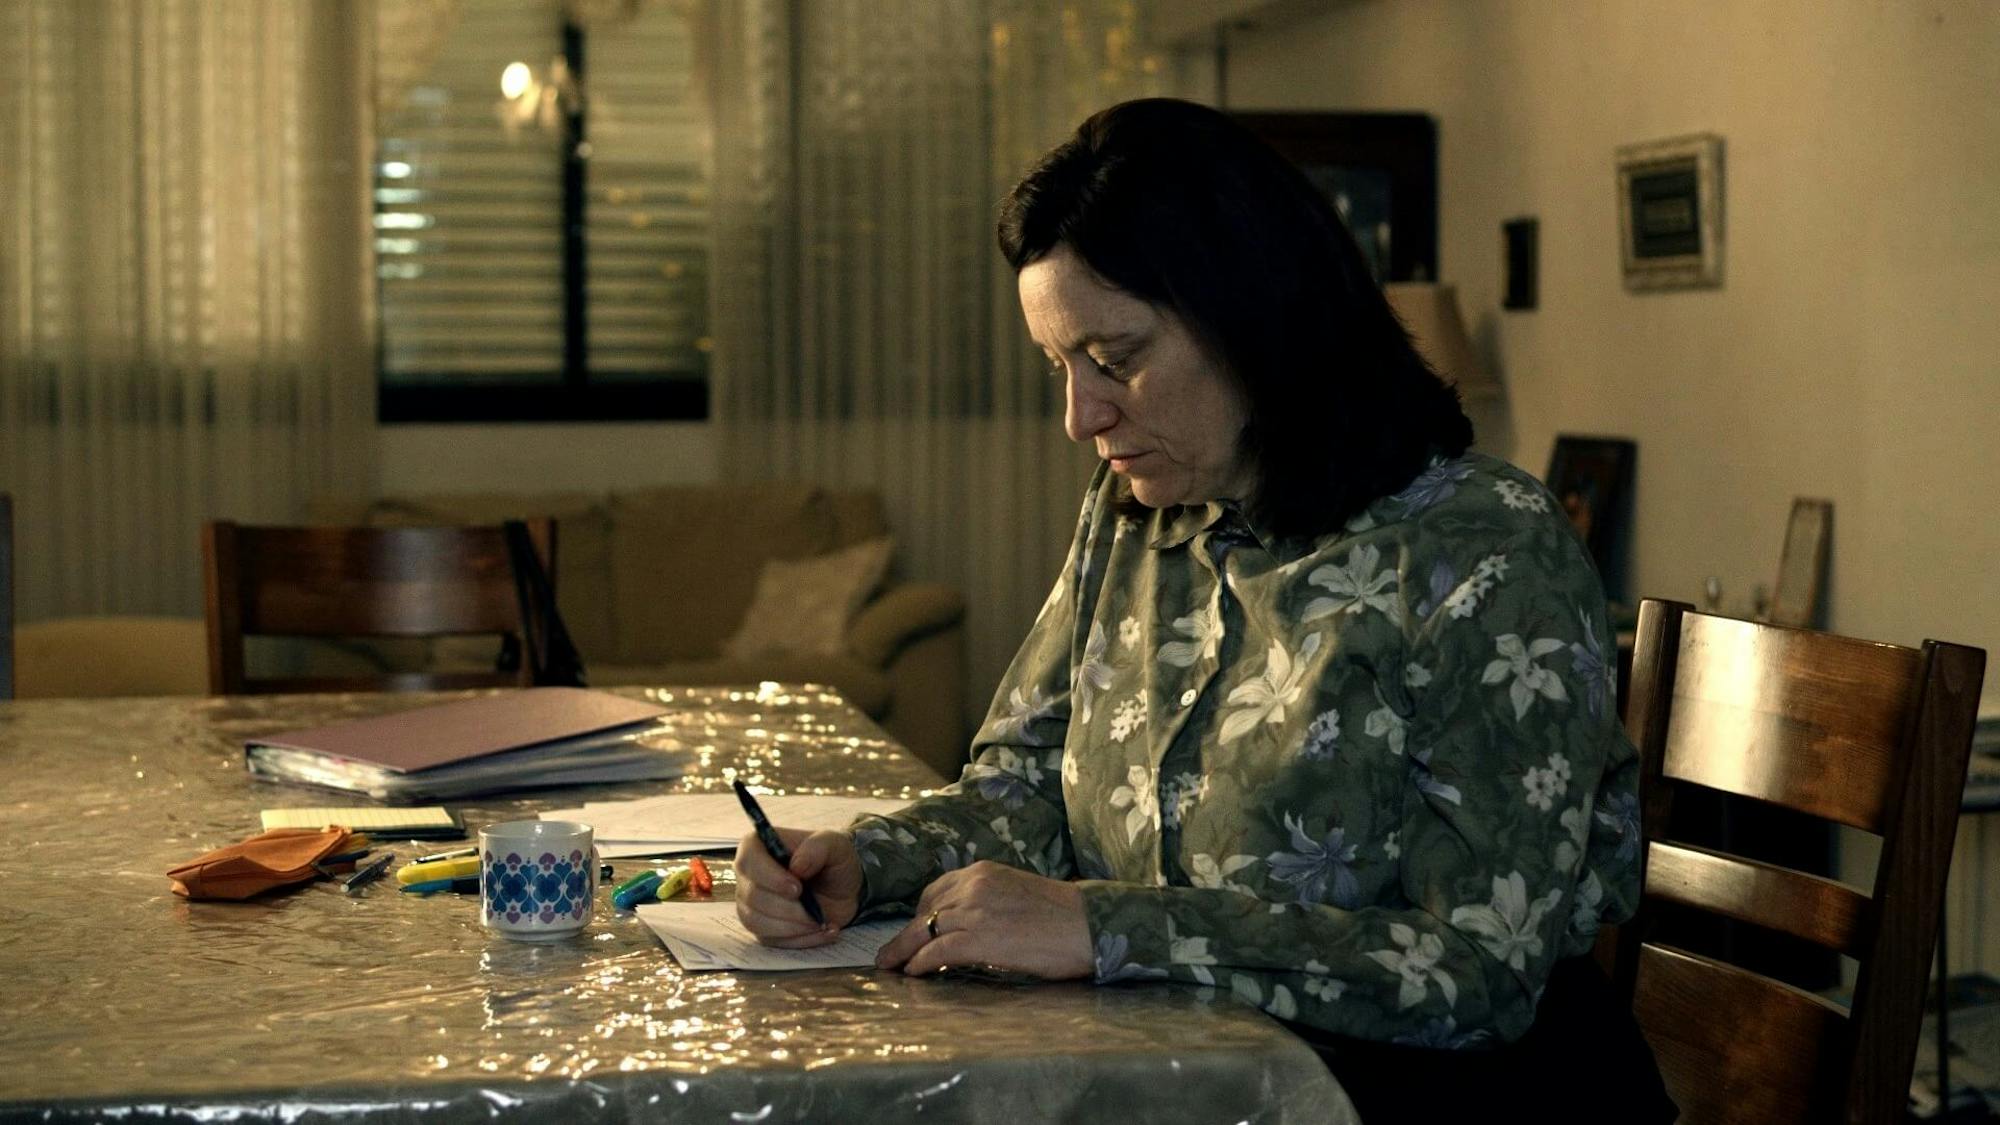 Tovi Shtisel (Eliana Shechter) sits at a plastic wrapped table writing something. She wears a green patterned top. The room is dark.